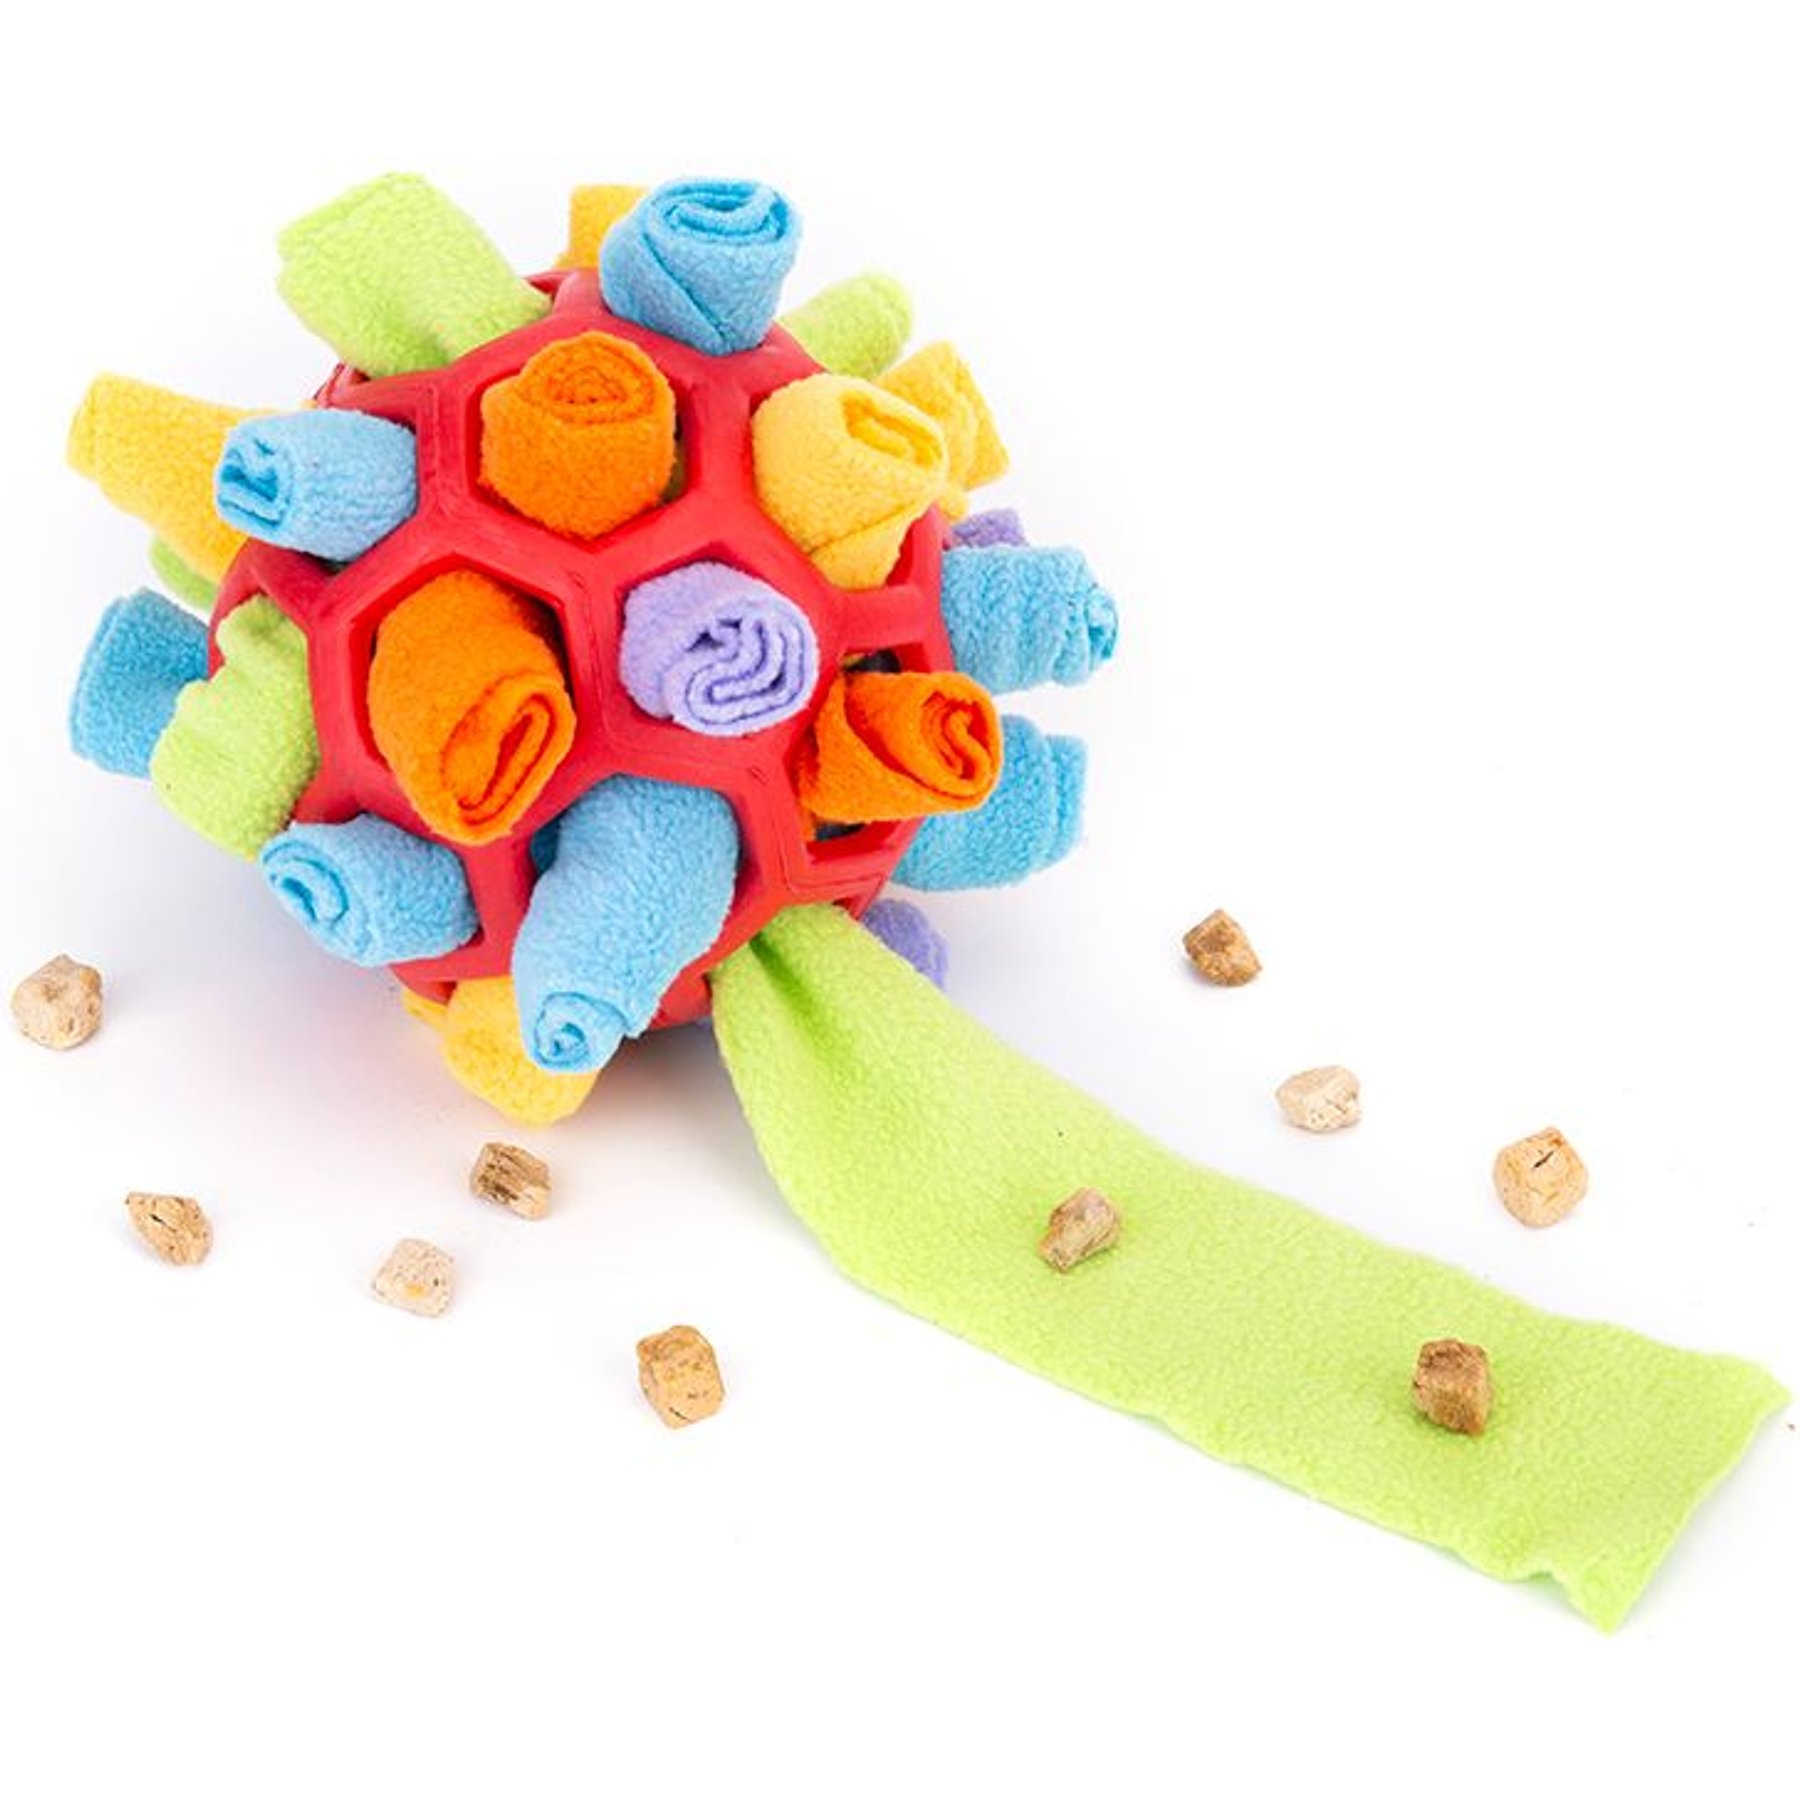 Sniff & Snack Dog Toy, Nose Play - 1 ea